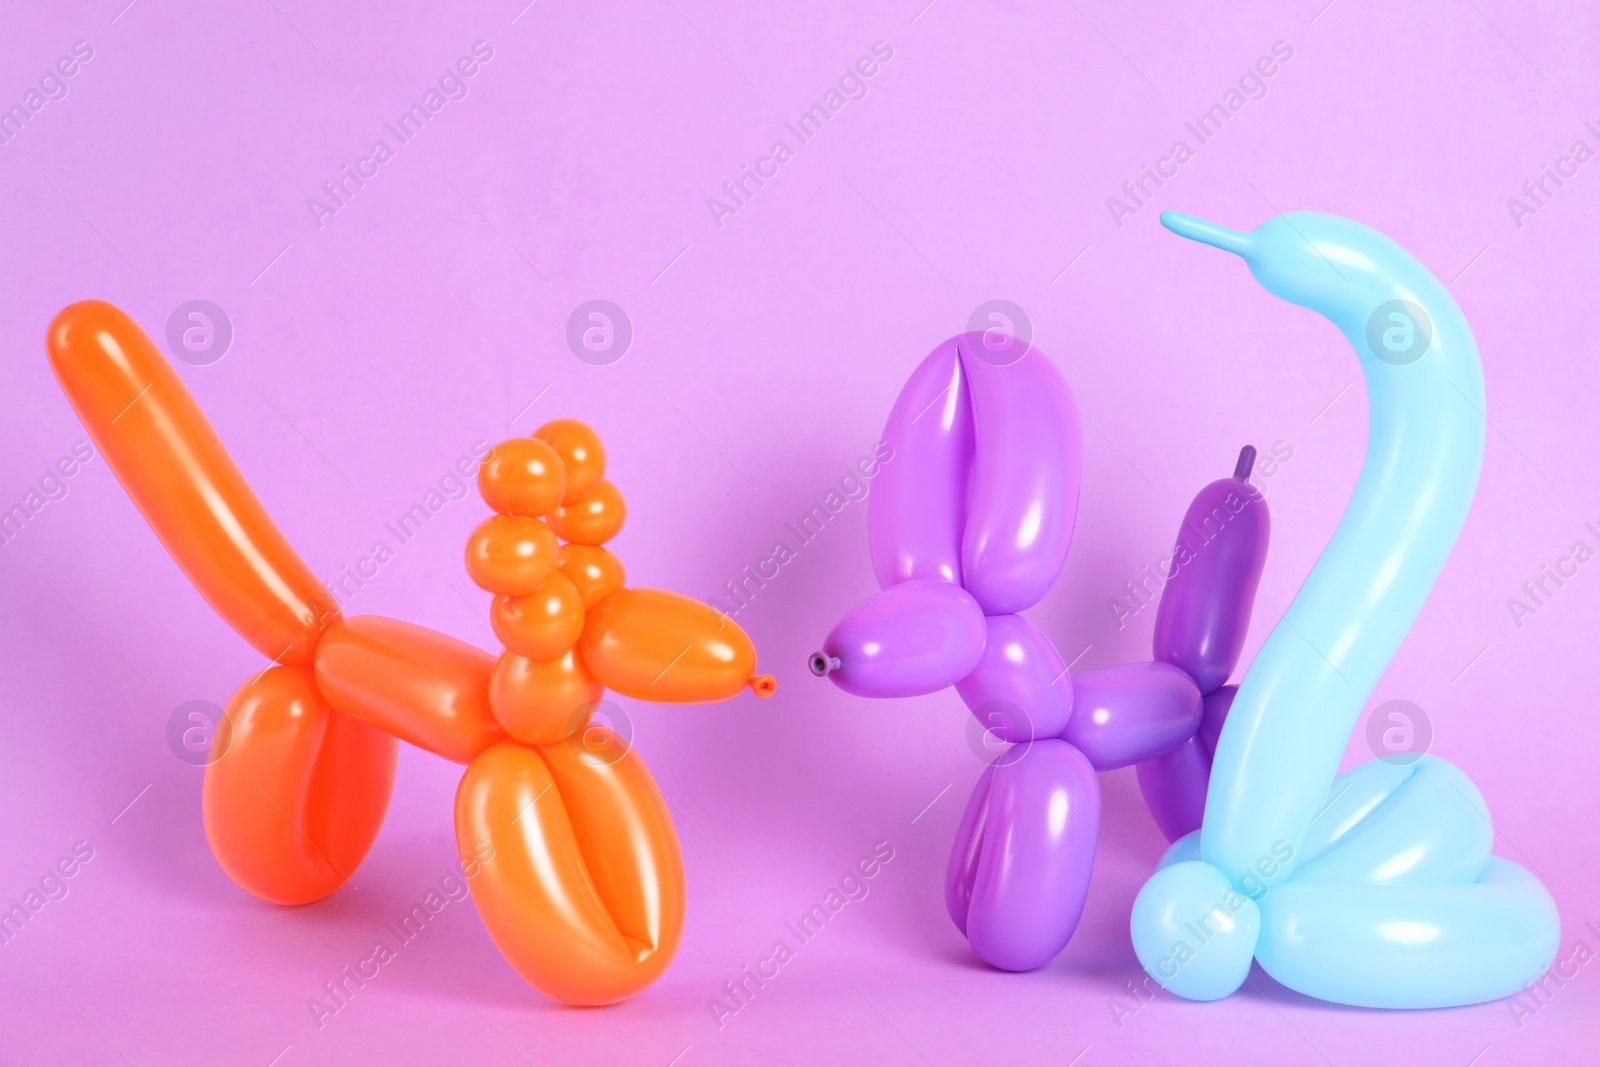 Photo of Animal figures made of modelling balloons on color background